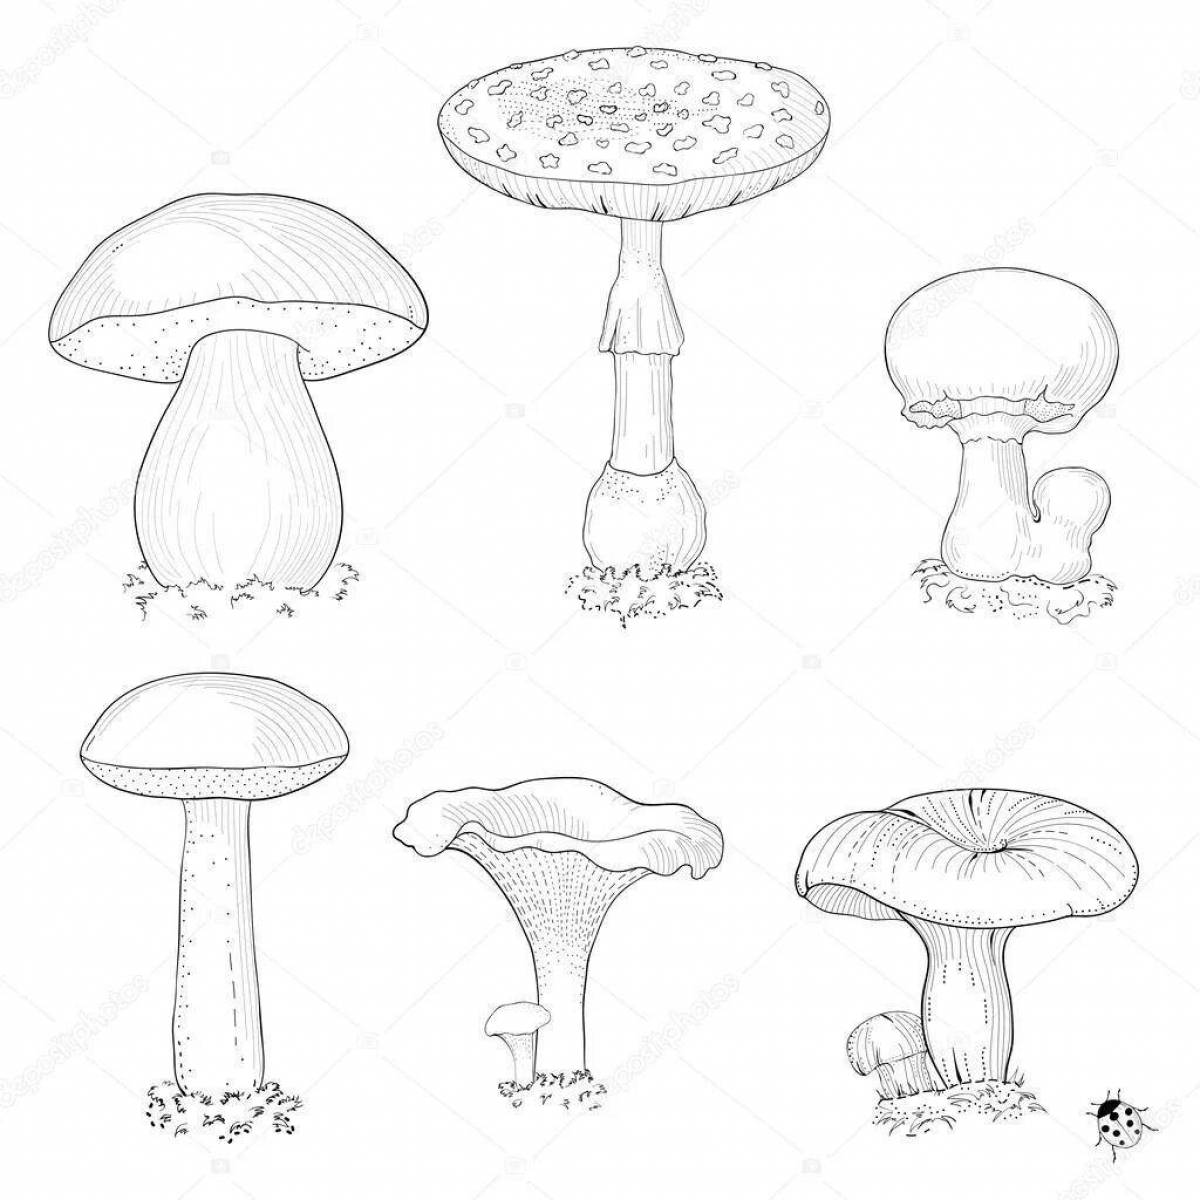 Coloring book that affects poisonous mushrooms